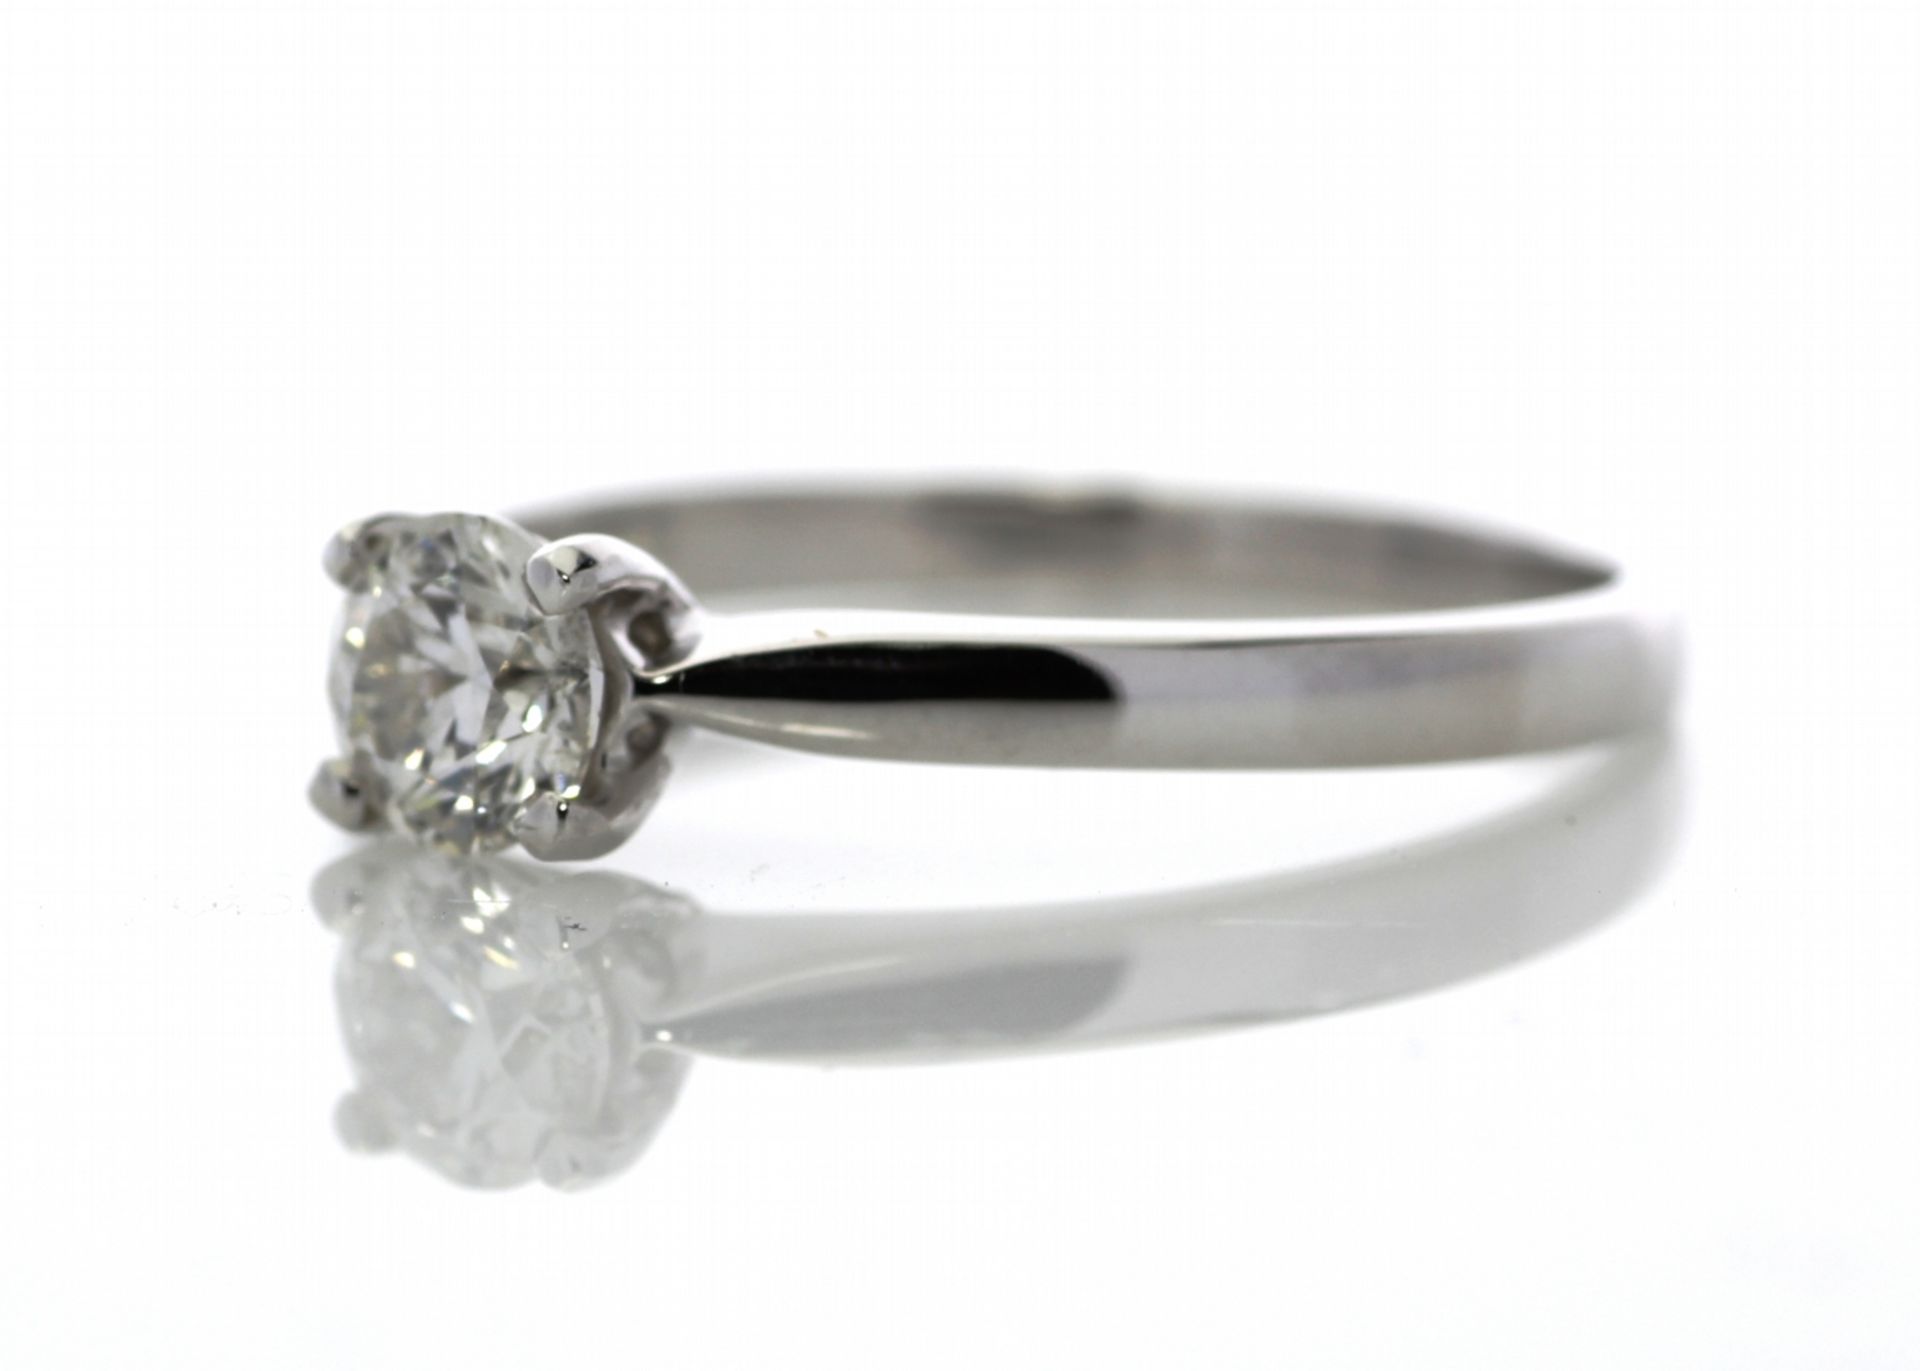 18ct White Gold Solitaire Diamond Ring 0.50 Carats - Image 3 of 6